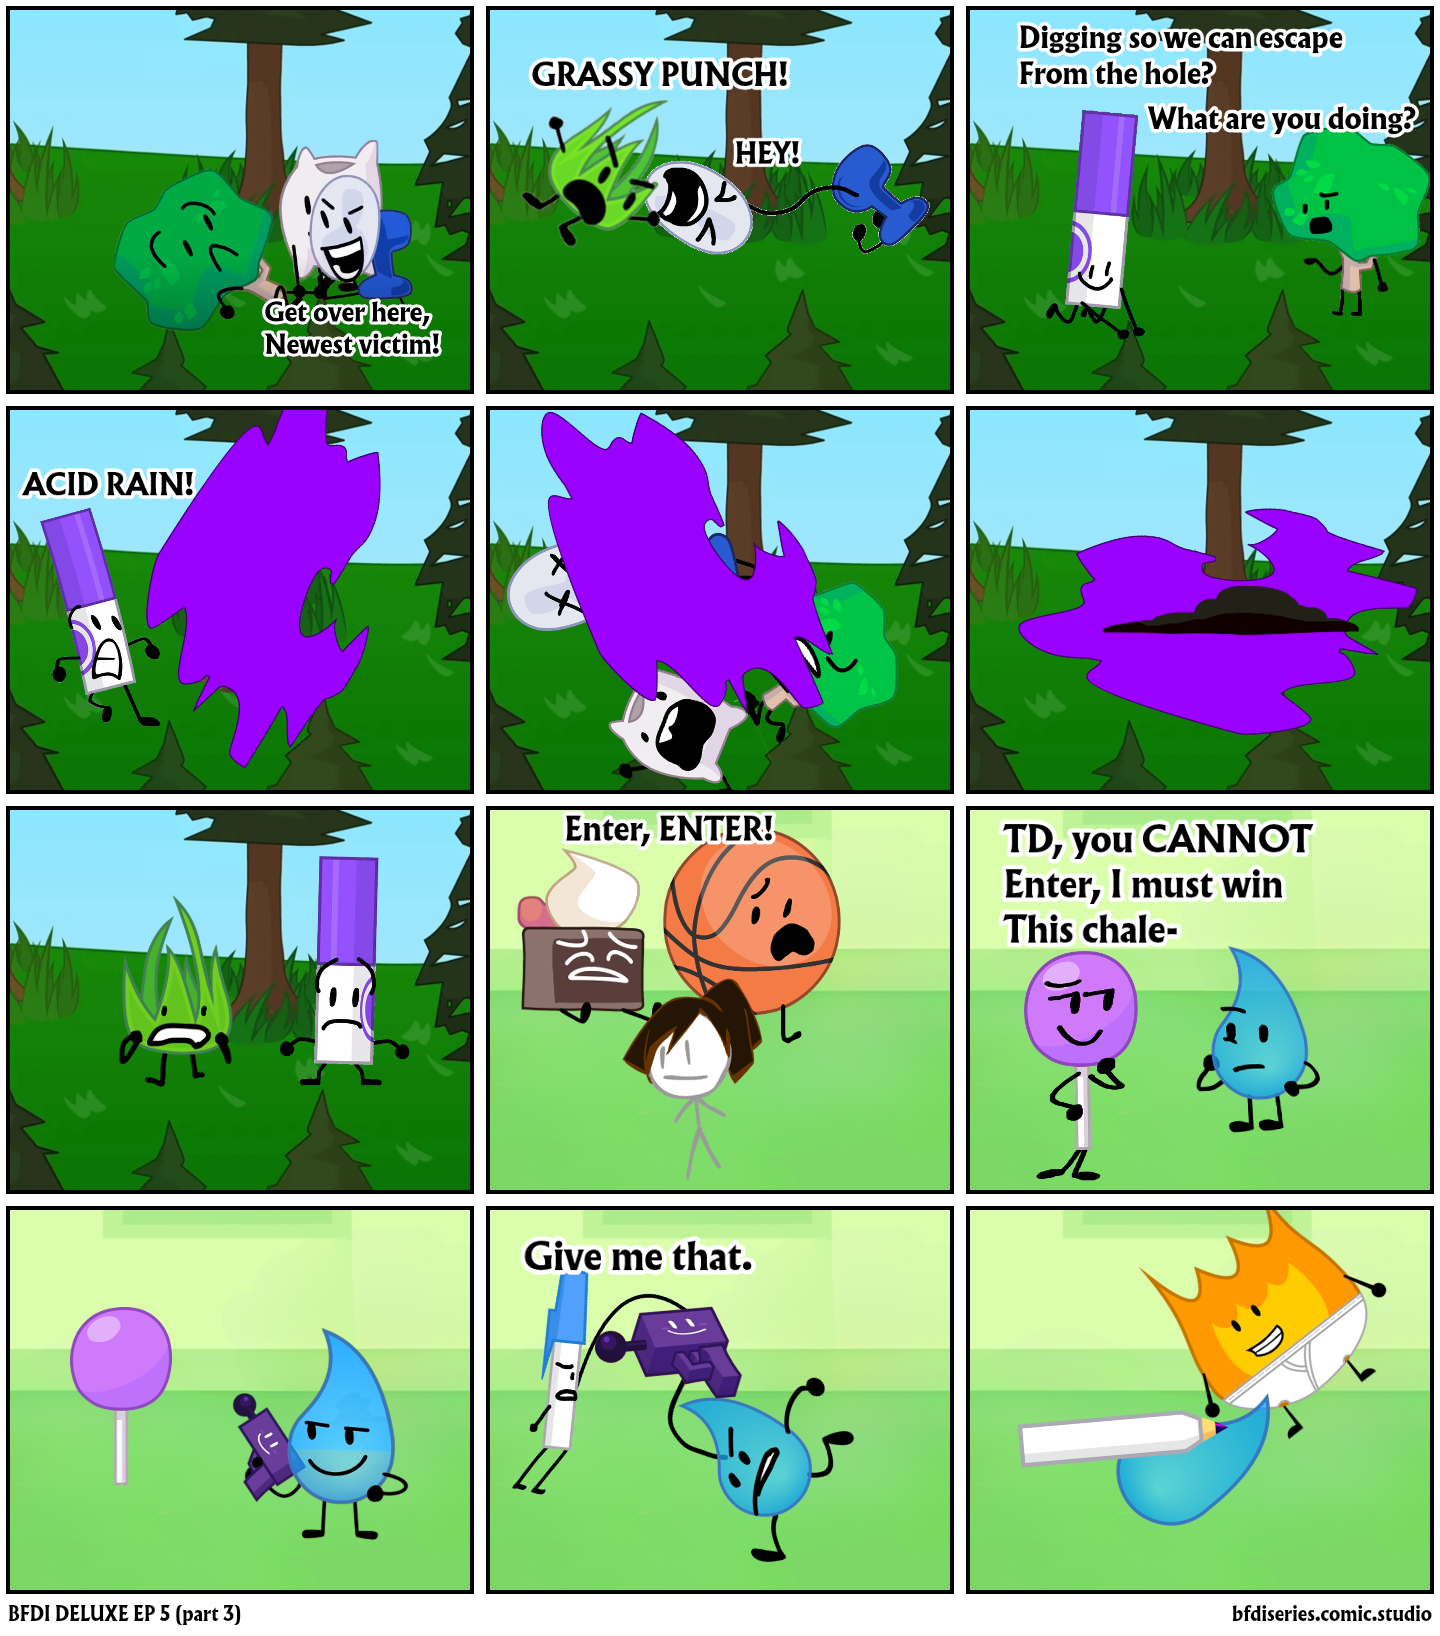 BFDI DELUXE EP 5 (part 3)